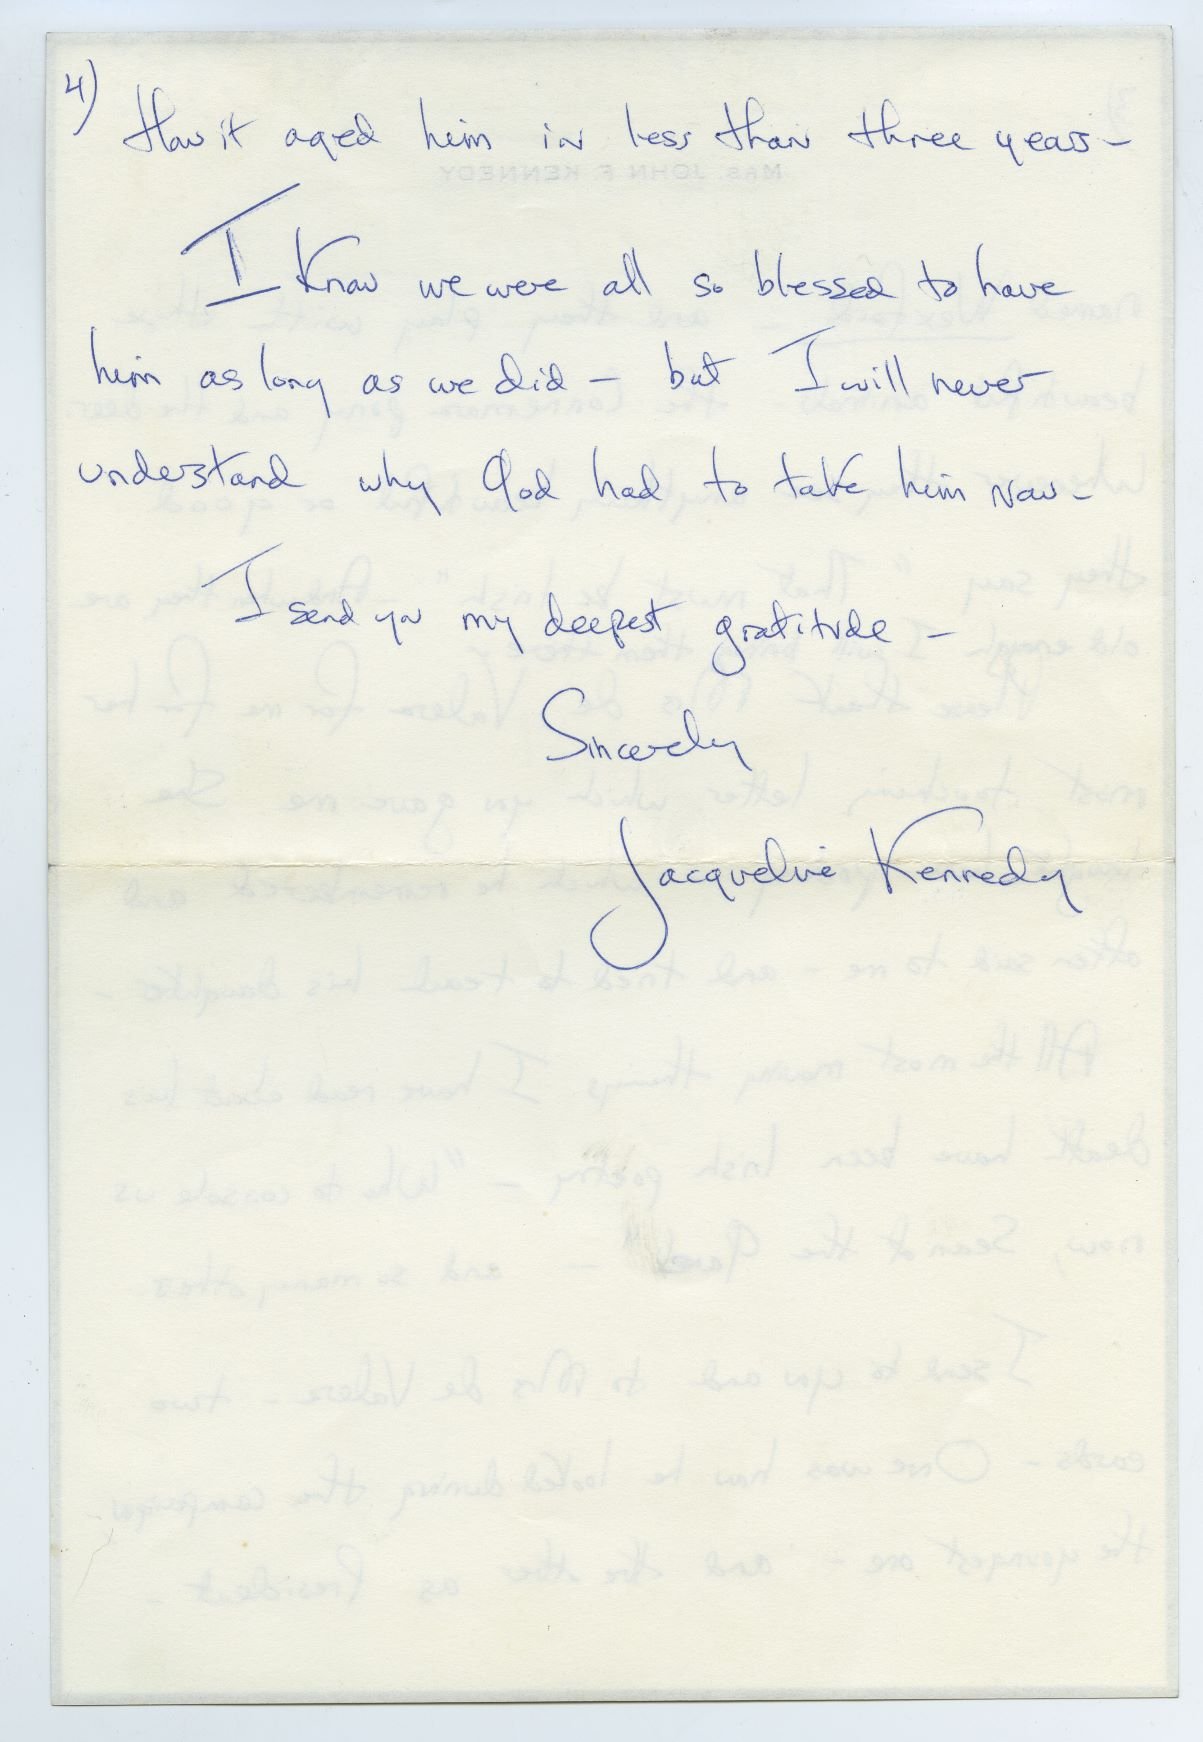 Page four of Jacqueline Kennedy's letter to President of Ireland Eamon de Valera six weeks after the assassination of her husband, President John F. Kennedy. This handwritten letter is featured in 'The Presidents' Letters: An Unexpected History of Ireland' by Flor MacCarthy and is reproduced with kind permission of UCD-OFM Partnership.